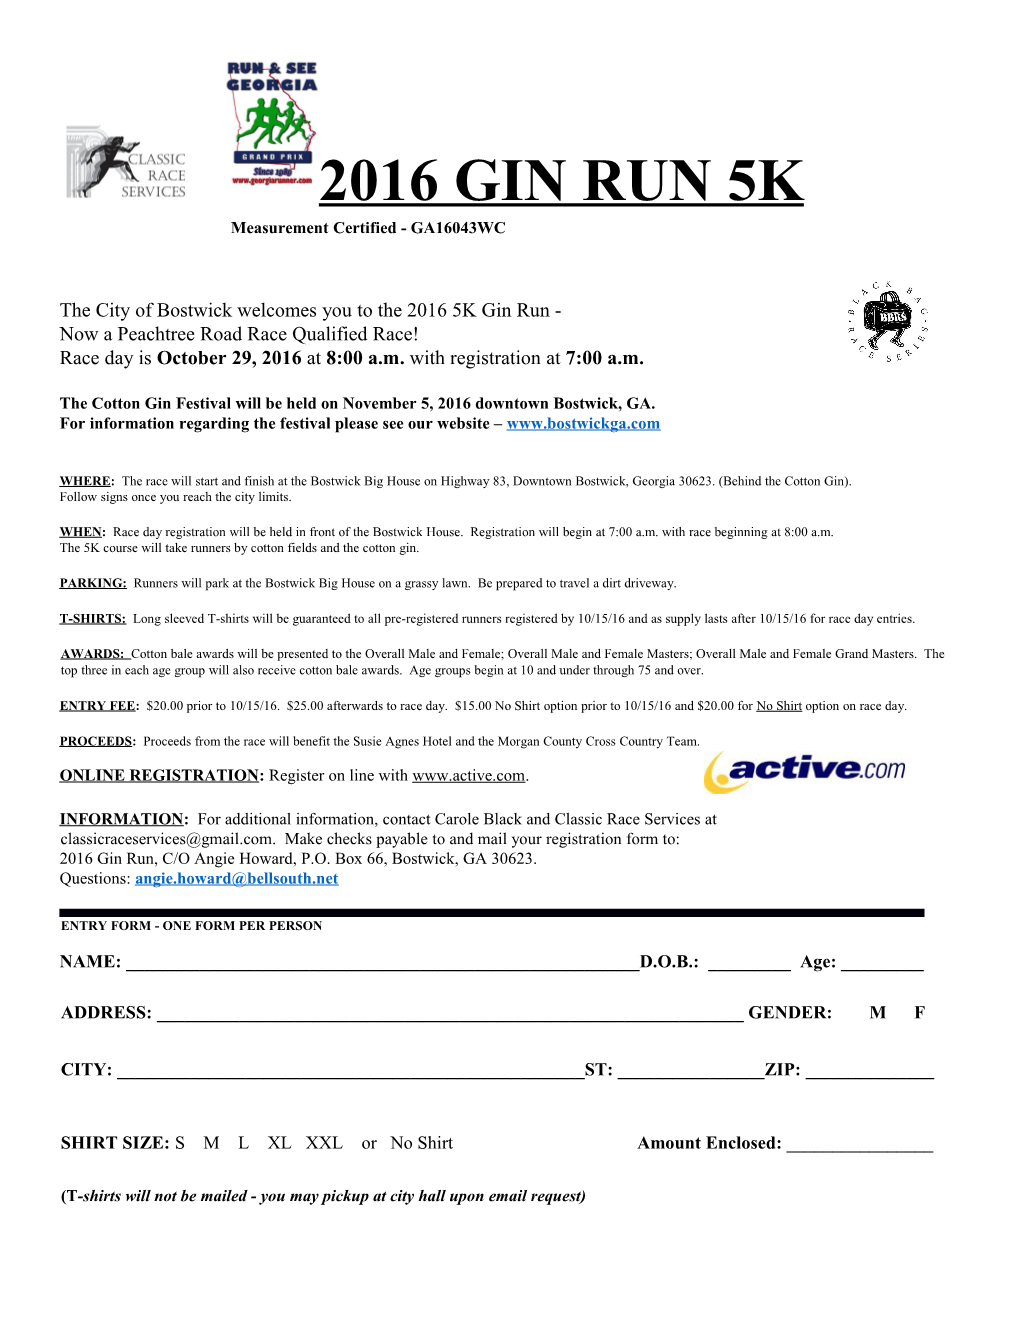 The City of Bostwick Welcomes You to the 2016 5K Gin Run